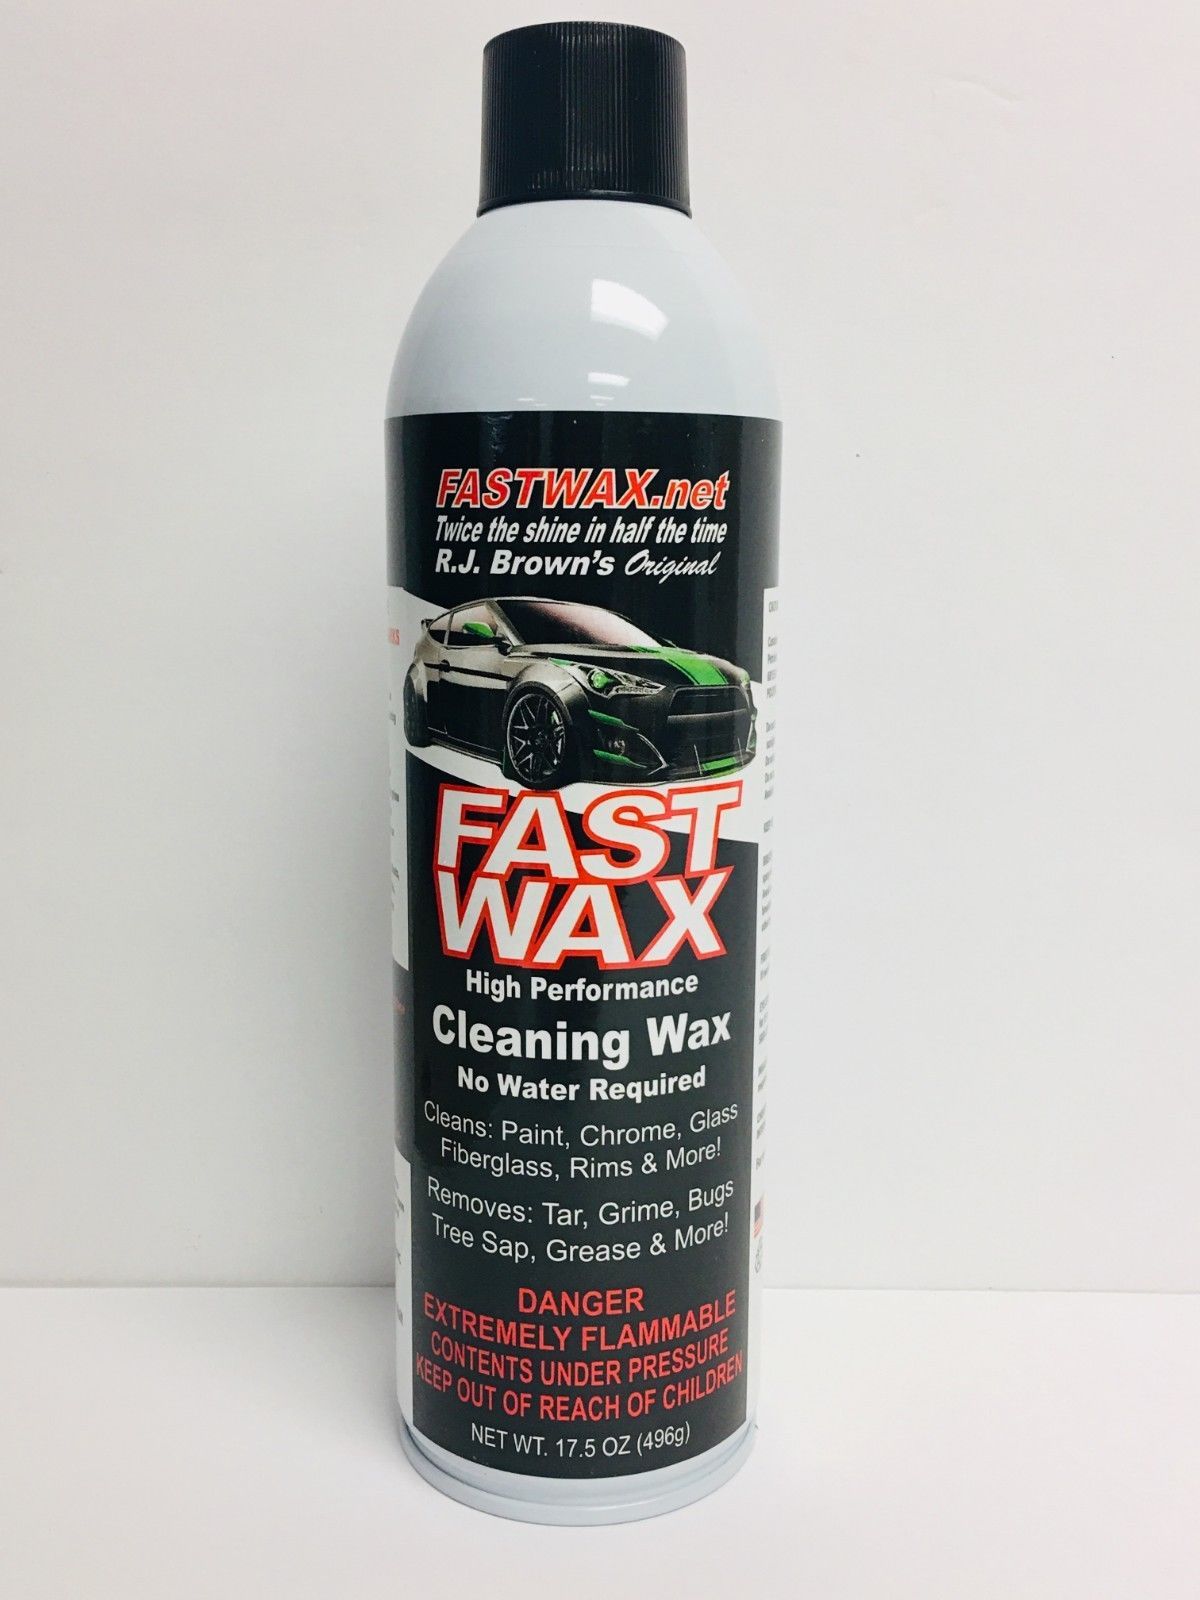 quick cleaner and wax spray